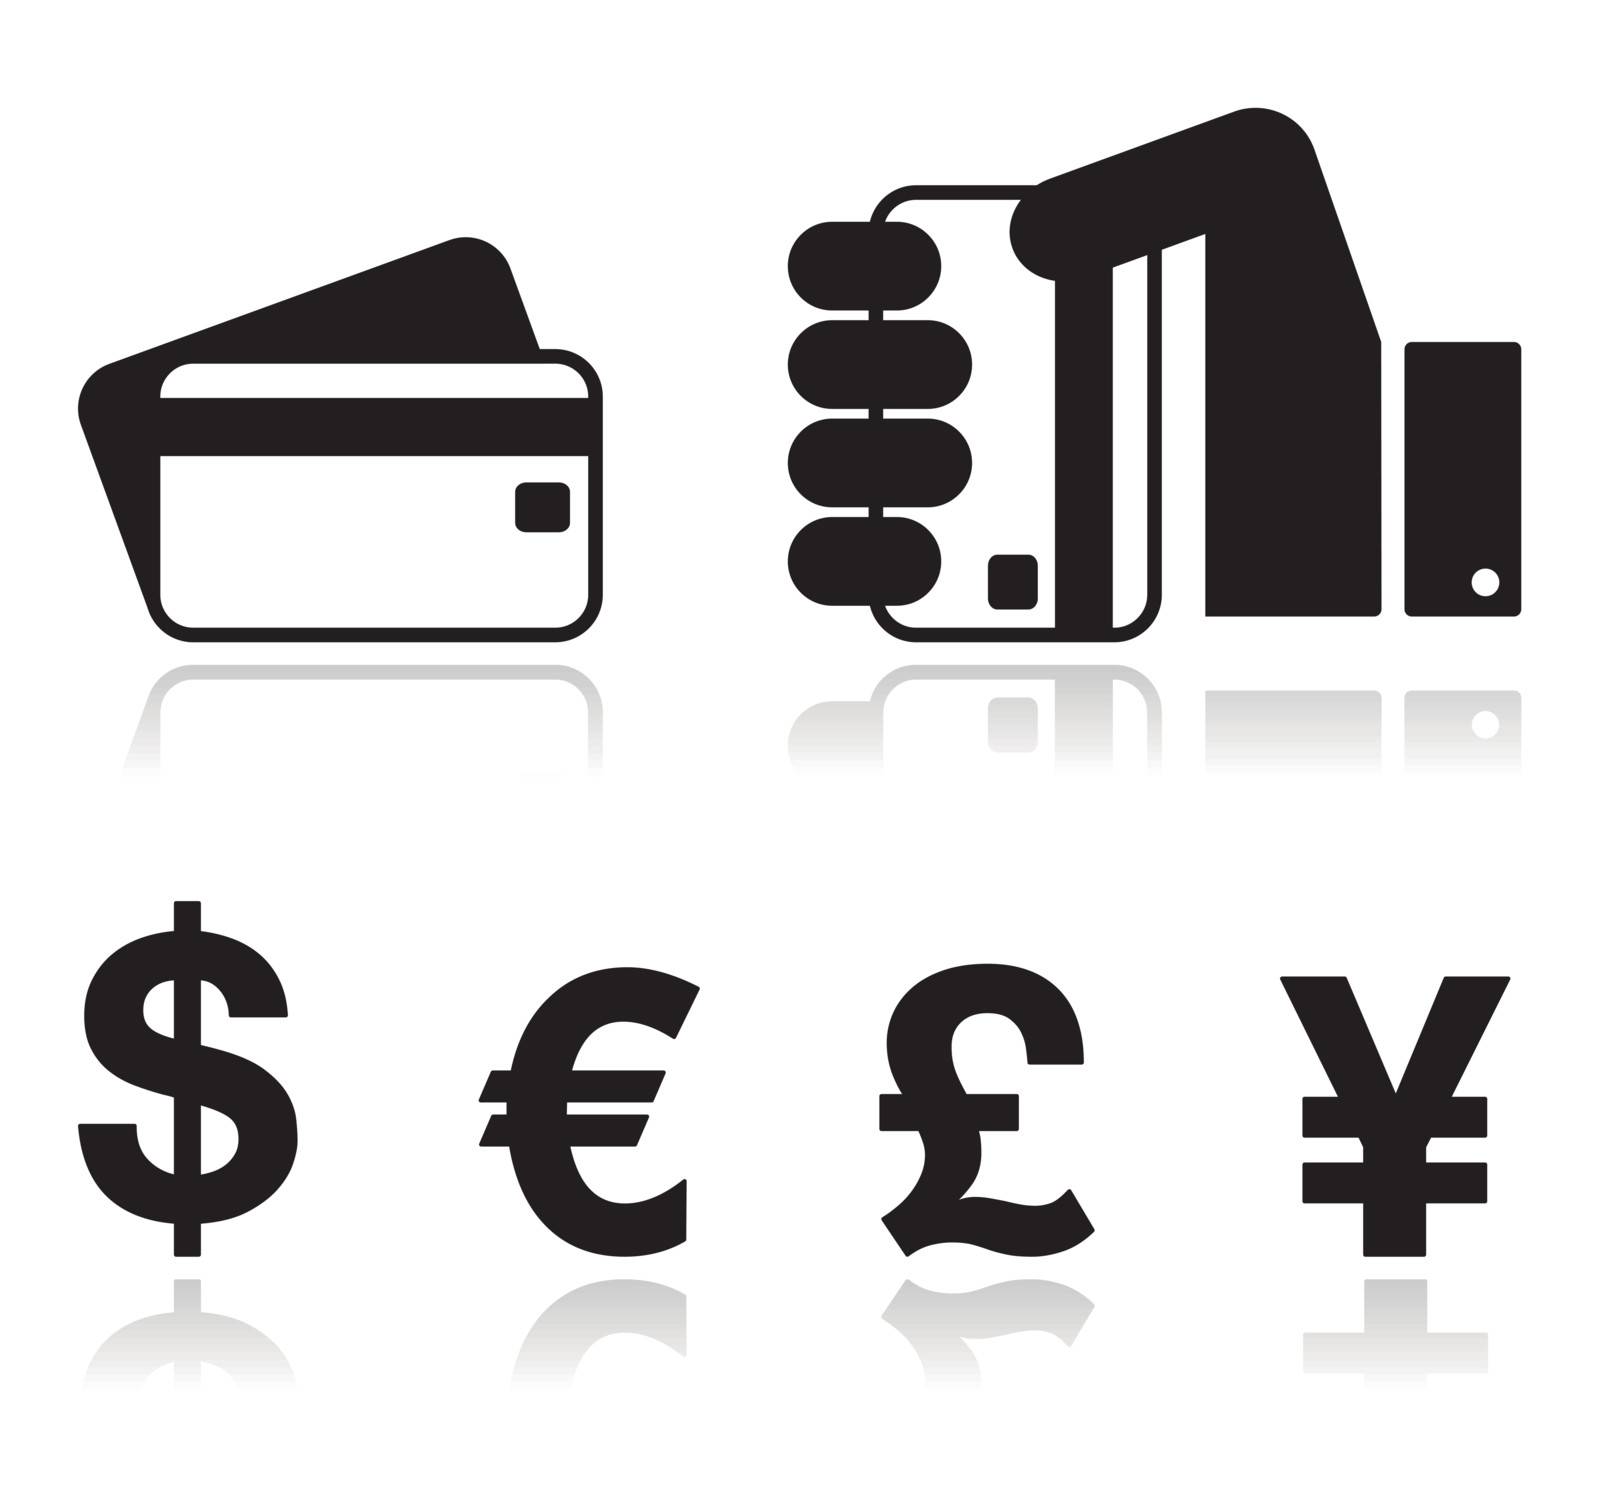 Black glossy icons: hand holding credit card, currency icons - dollar sign, euro, pound, yen